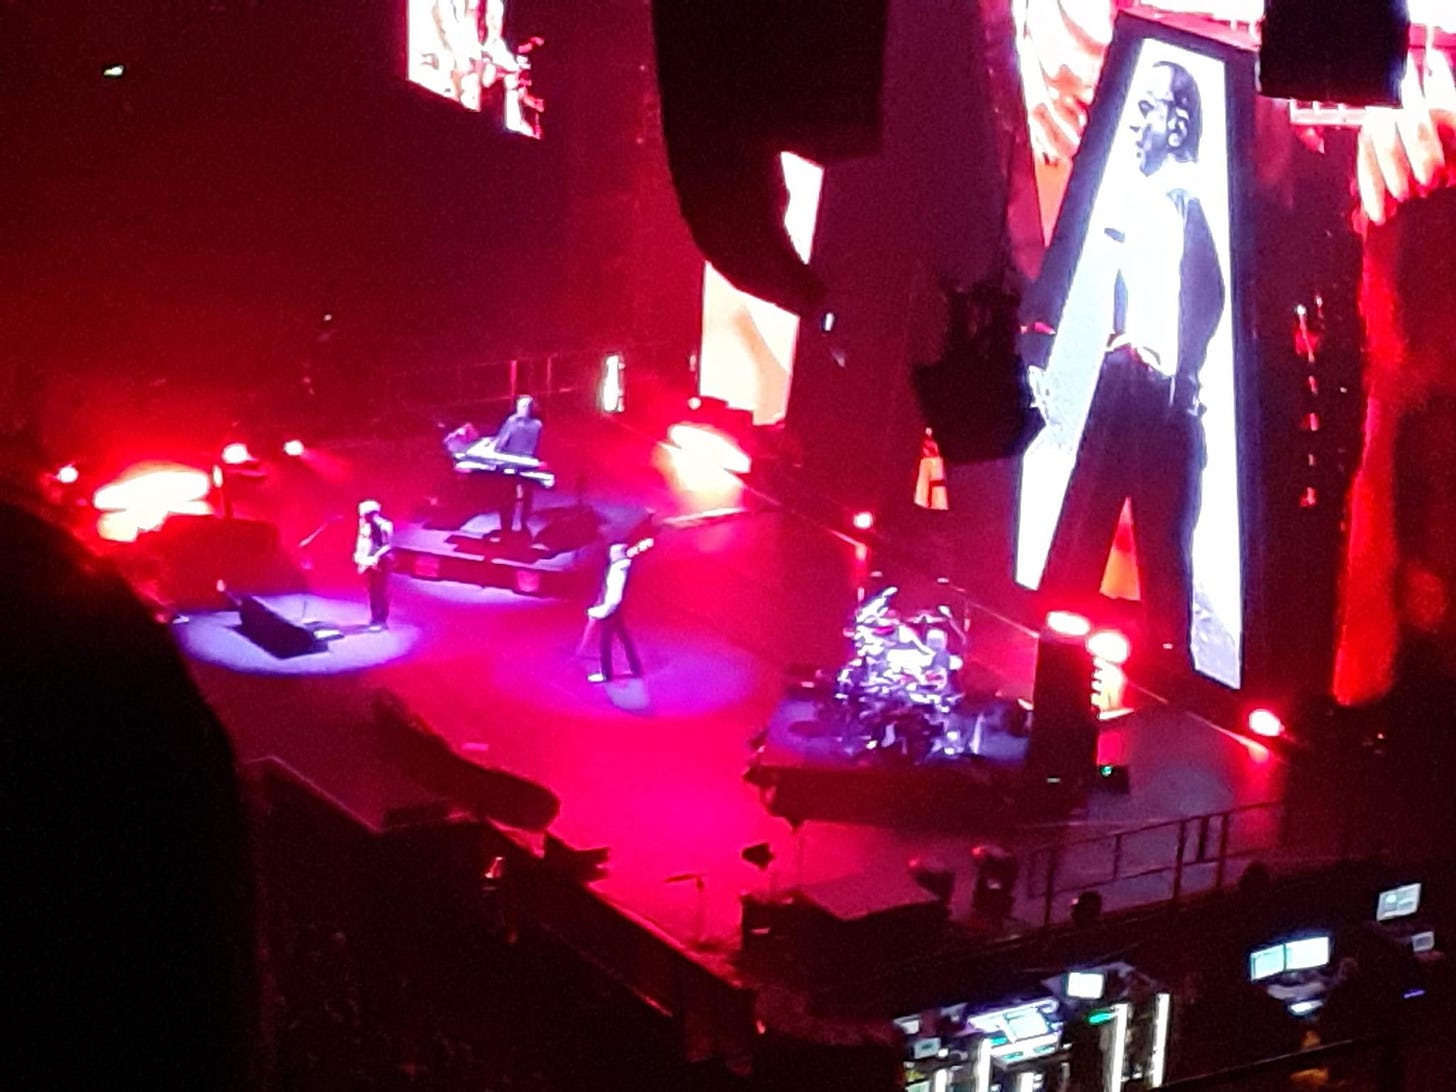 A distant view of the band depeche mode on a red lit stage, one person playing a guitar, one the keyboards, one the drums, and a singer. There is a large screen in the background with a bit M on and a video projection of the lead singer